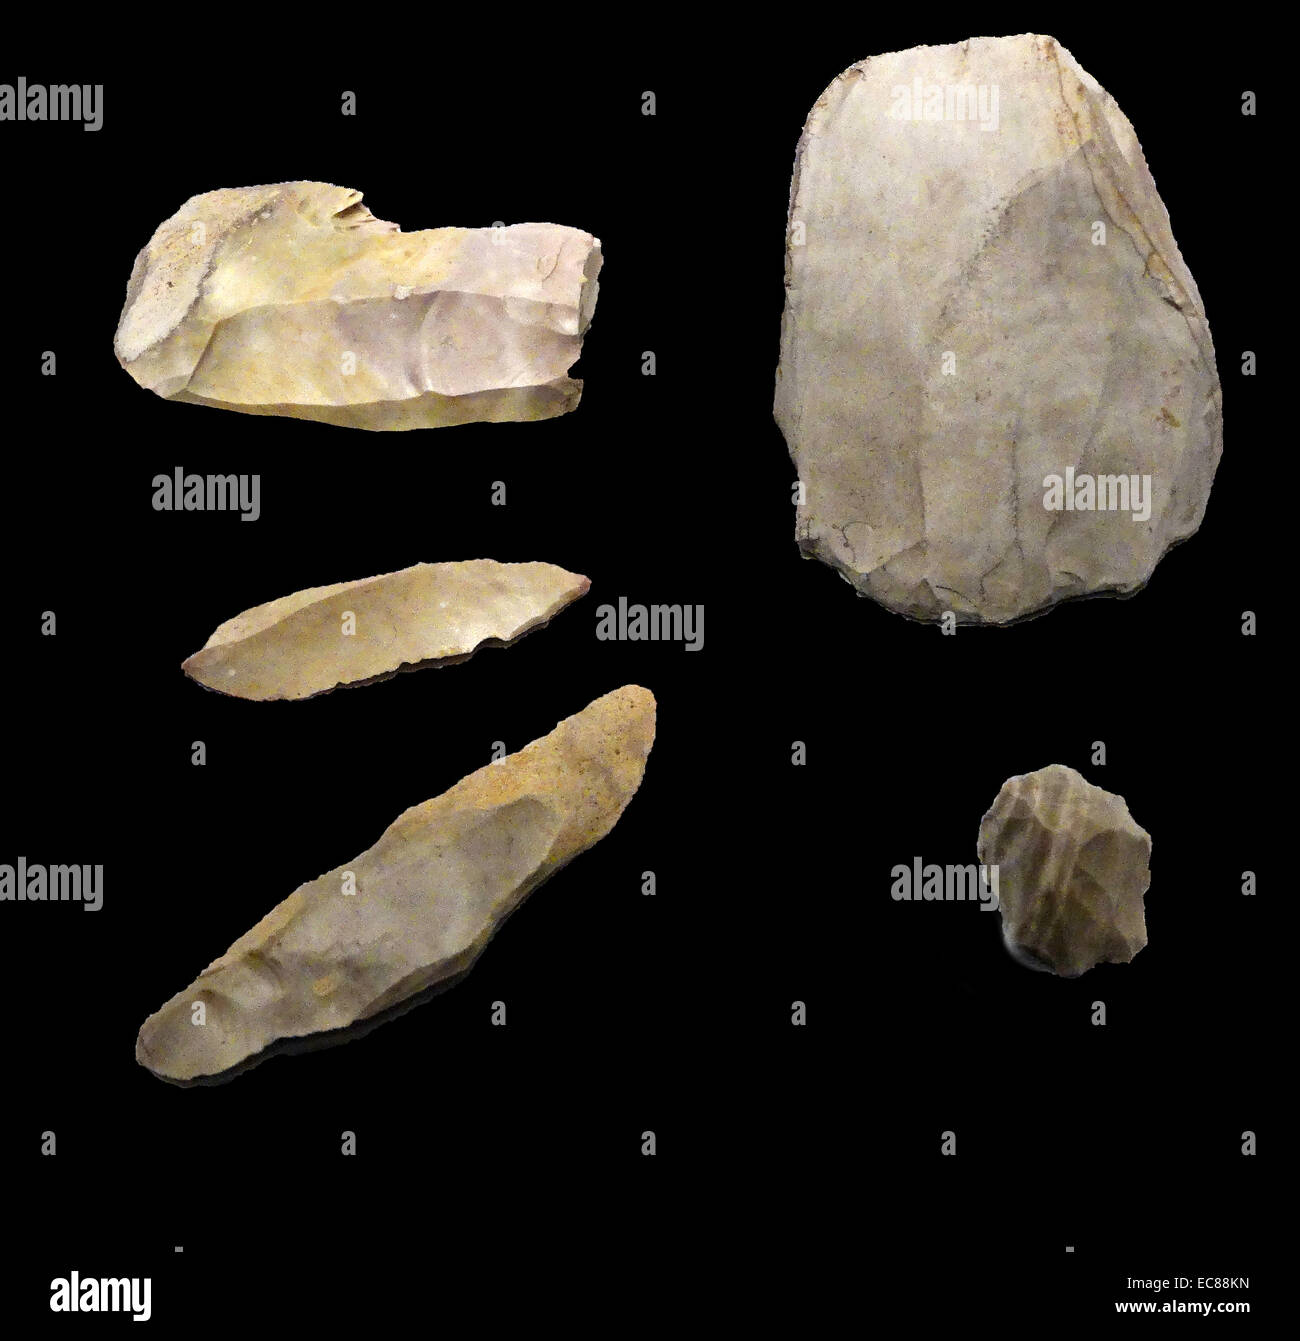 https://c8.alamy.com/comp/EC88KN/flint-hunting-tools-used-toward-the-end-of-the-stone-age-dated-18000-EC88KN.jpg